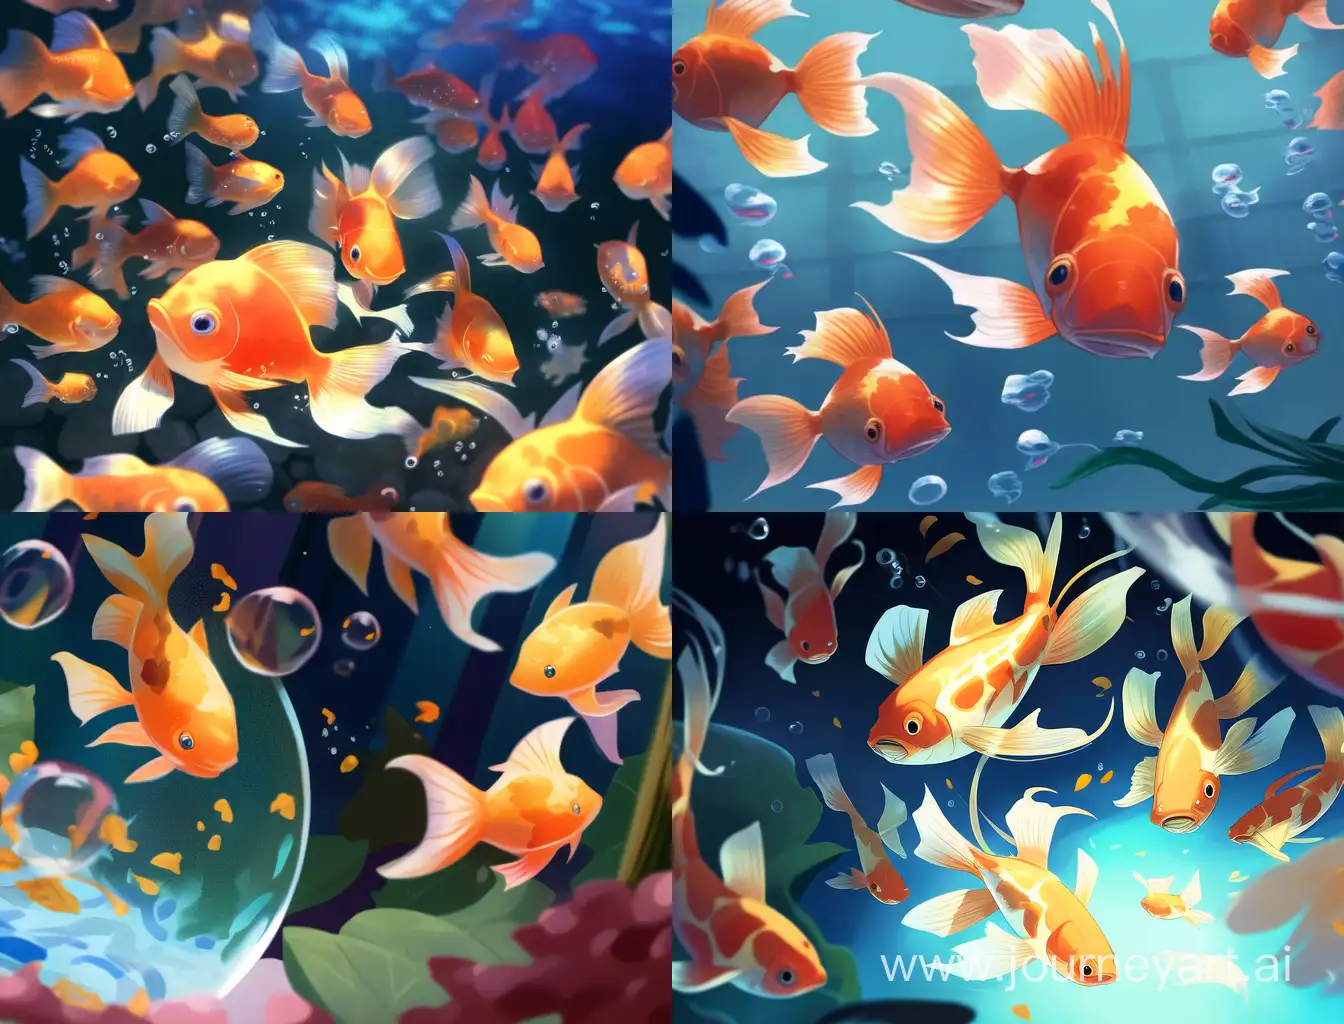 Numeric-Transformation-of-a-Goldfish-in-43-Aspect-Ratio